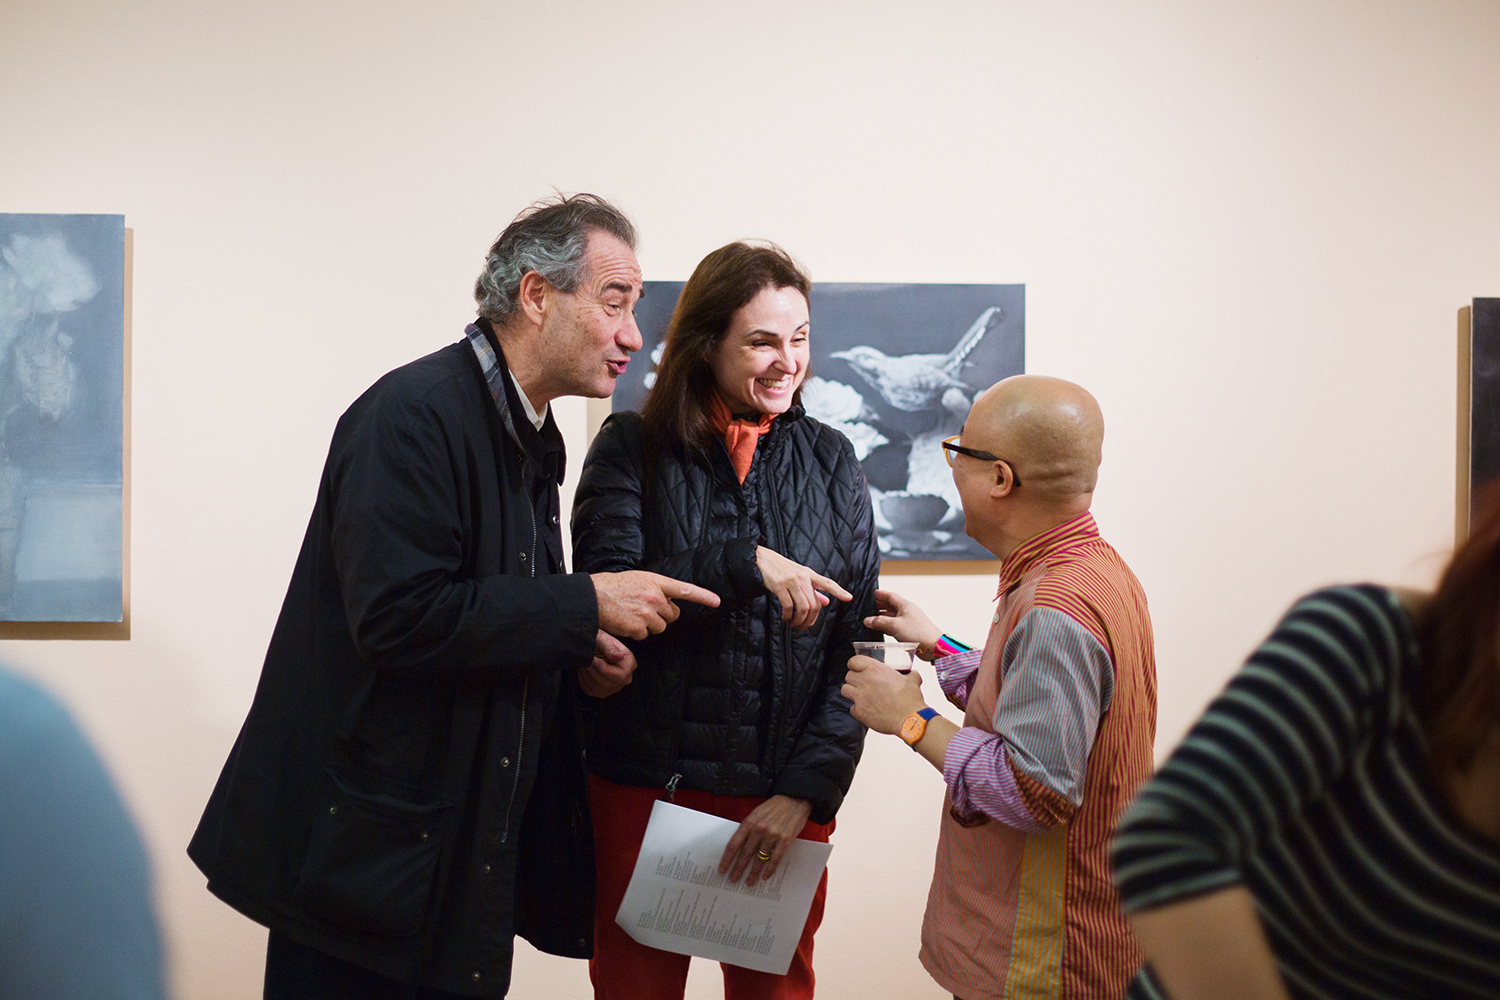 Phong Bui at the Opening for "Unreasonable Sized Paintings"